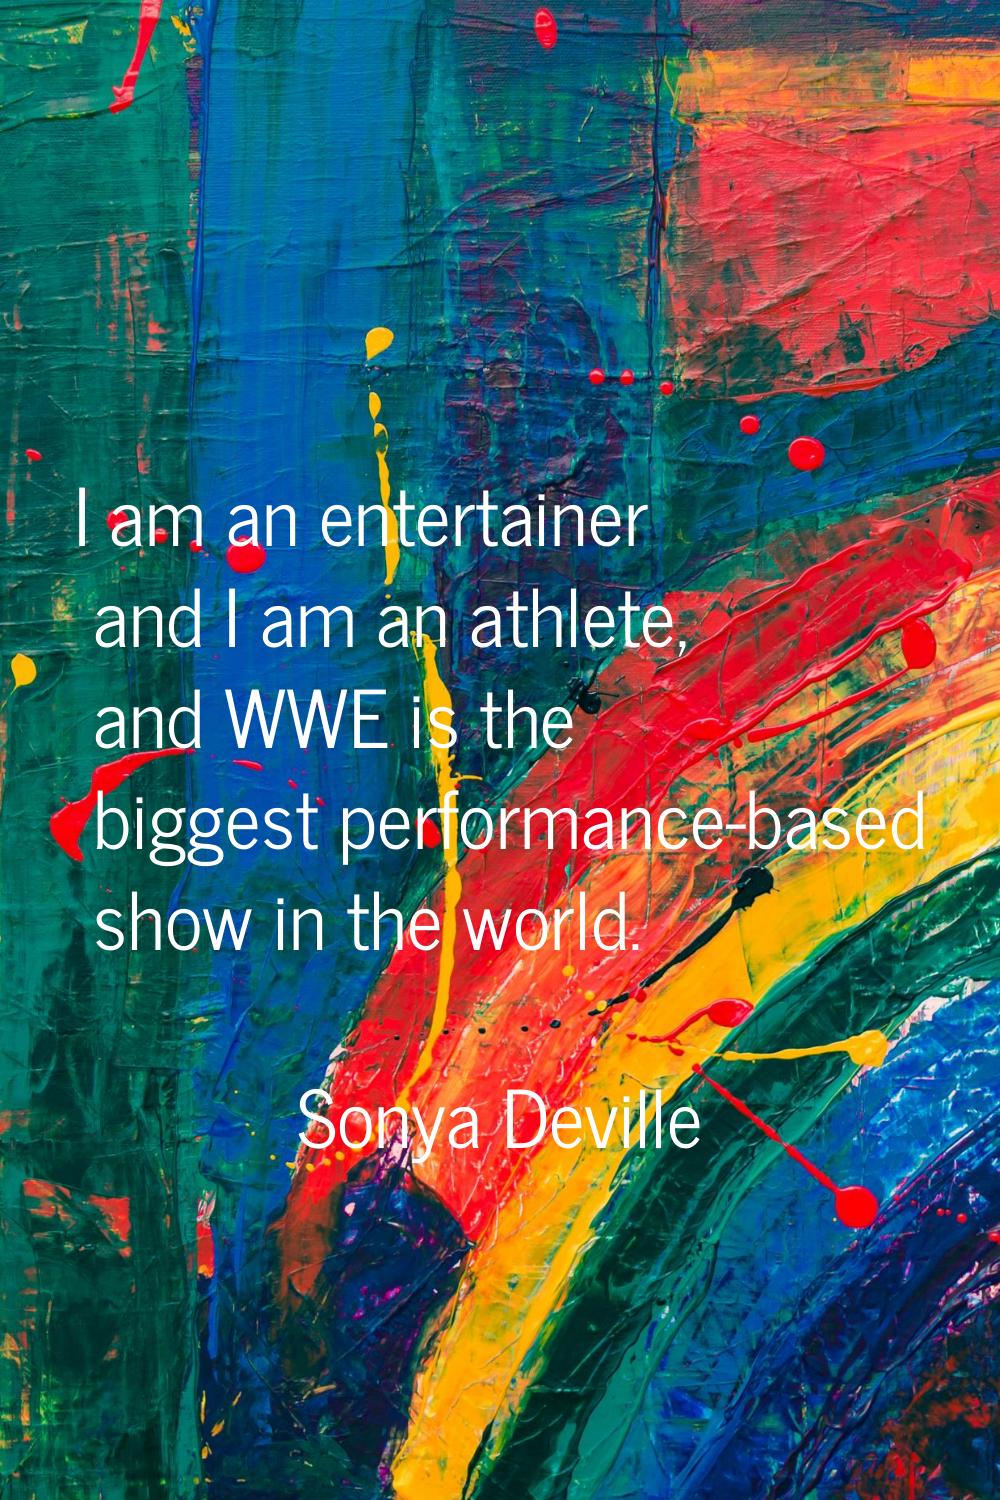 I am an entertainer and I am an athlete, and WWE is the biggest performance-based show in the world